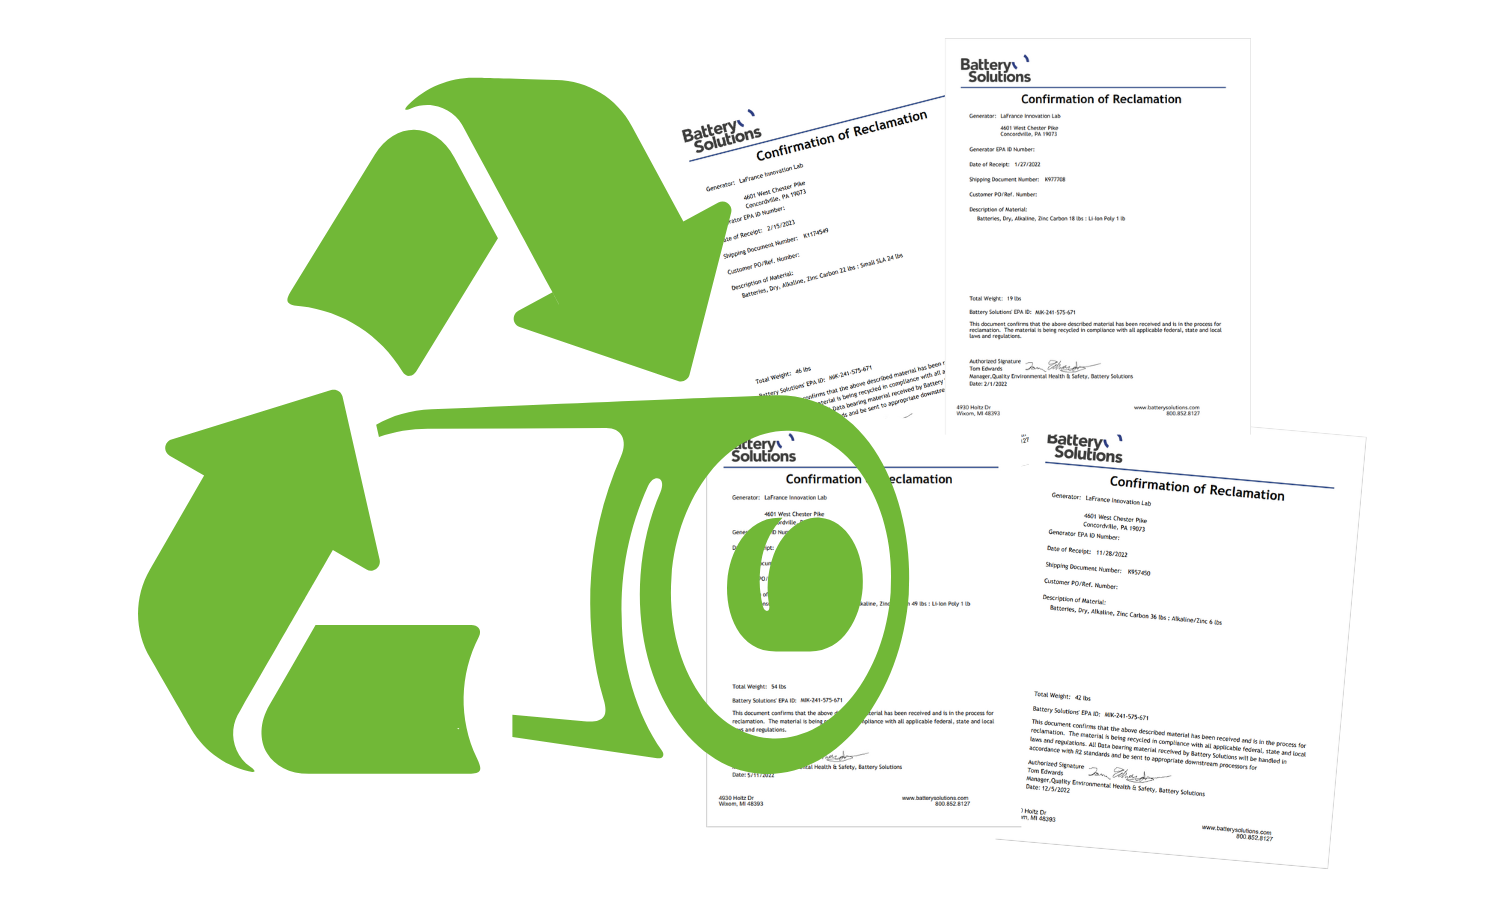 Recycle logo with battery included to show battery recycling